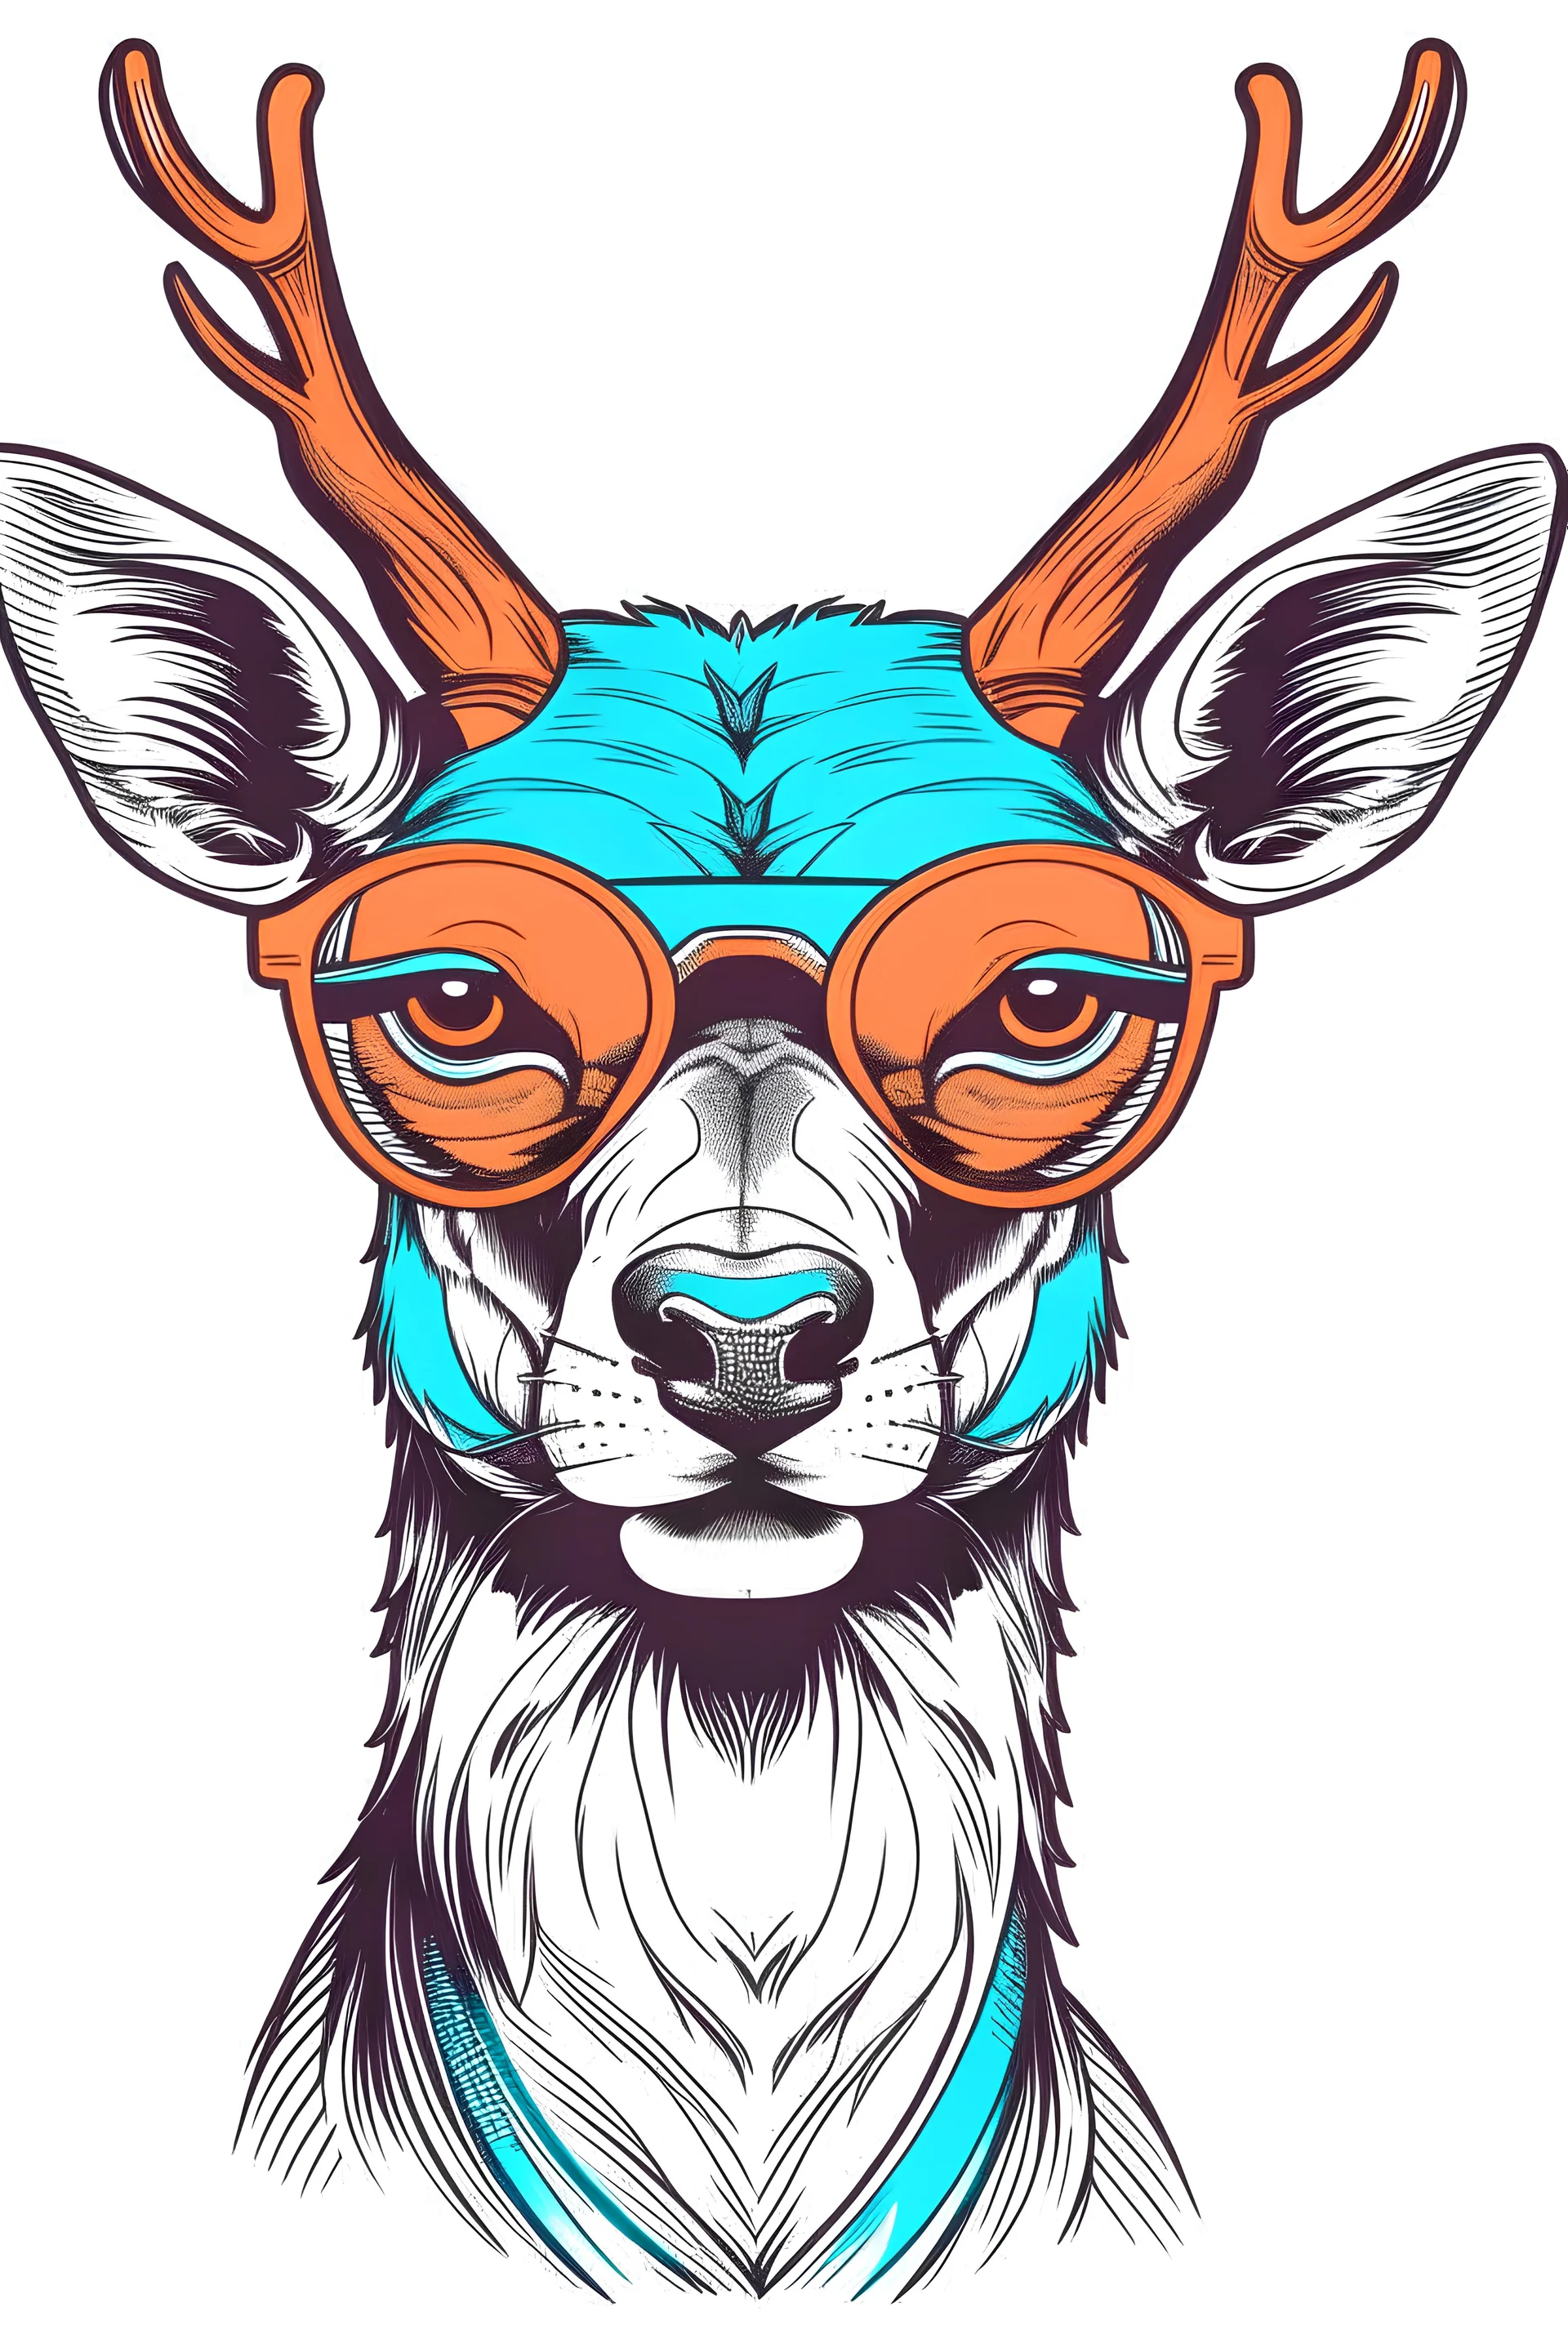 DEER wearing sunglasses, Style: Retro 80s, Mood: Groovy, T-shirt design graphic, vector, contour, white background.